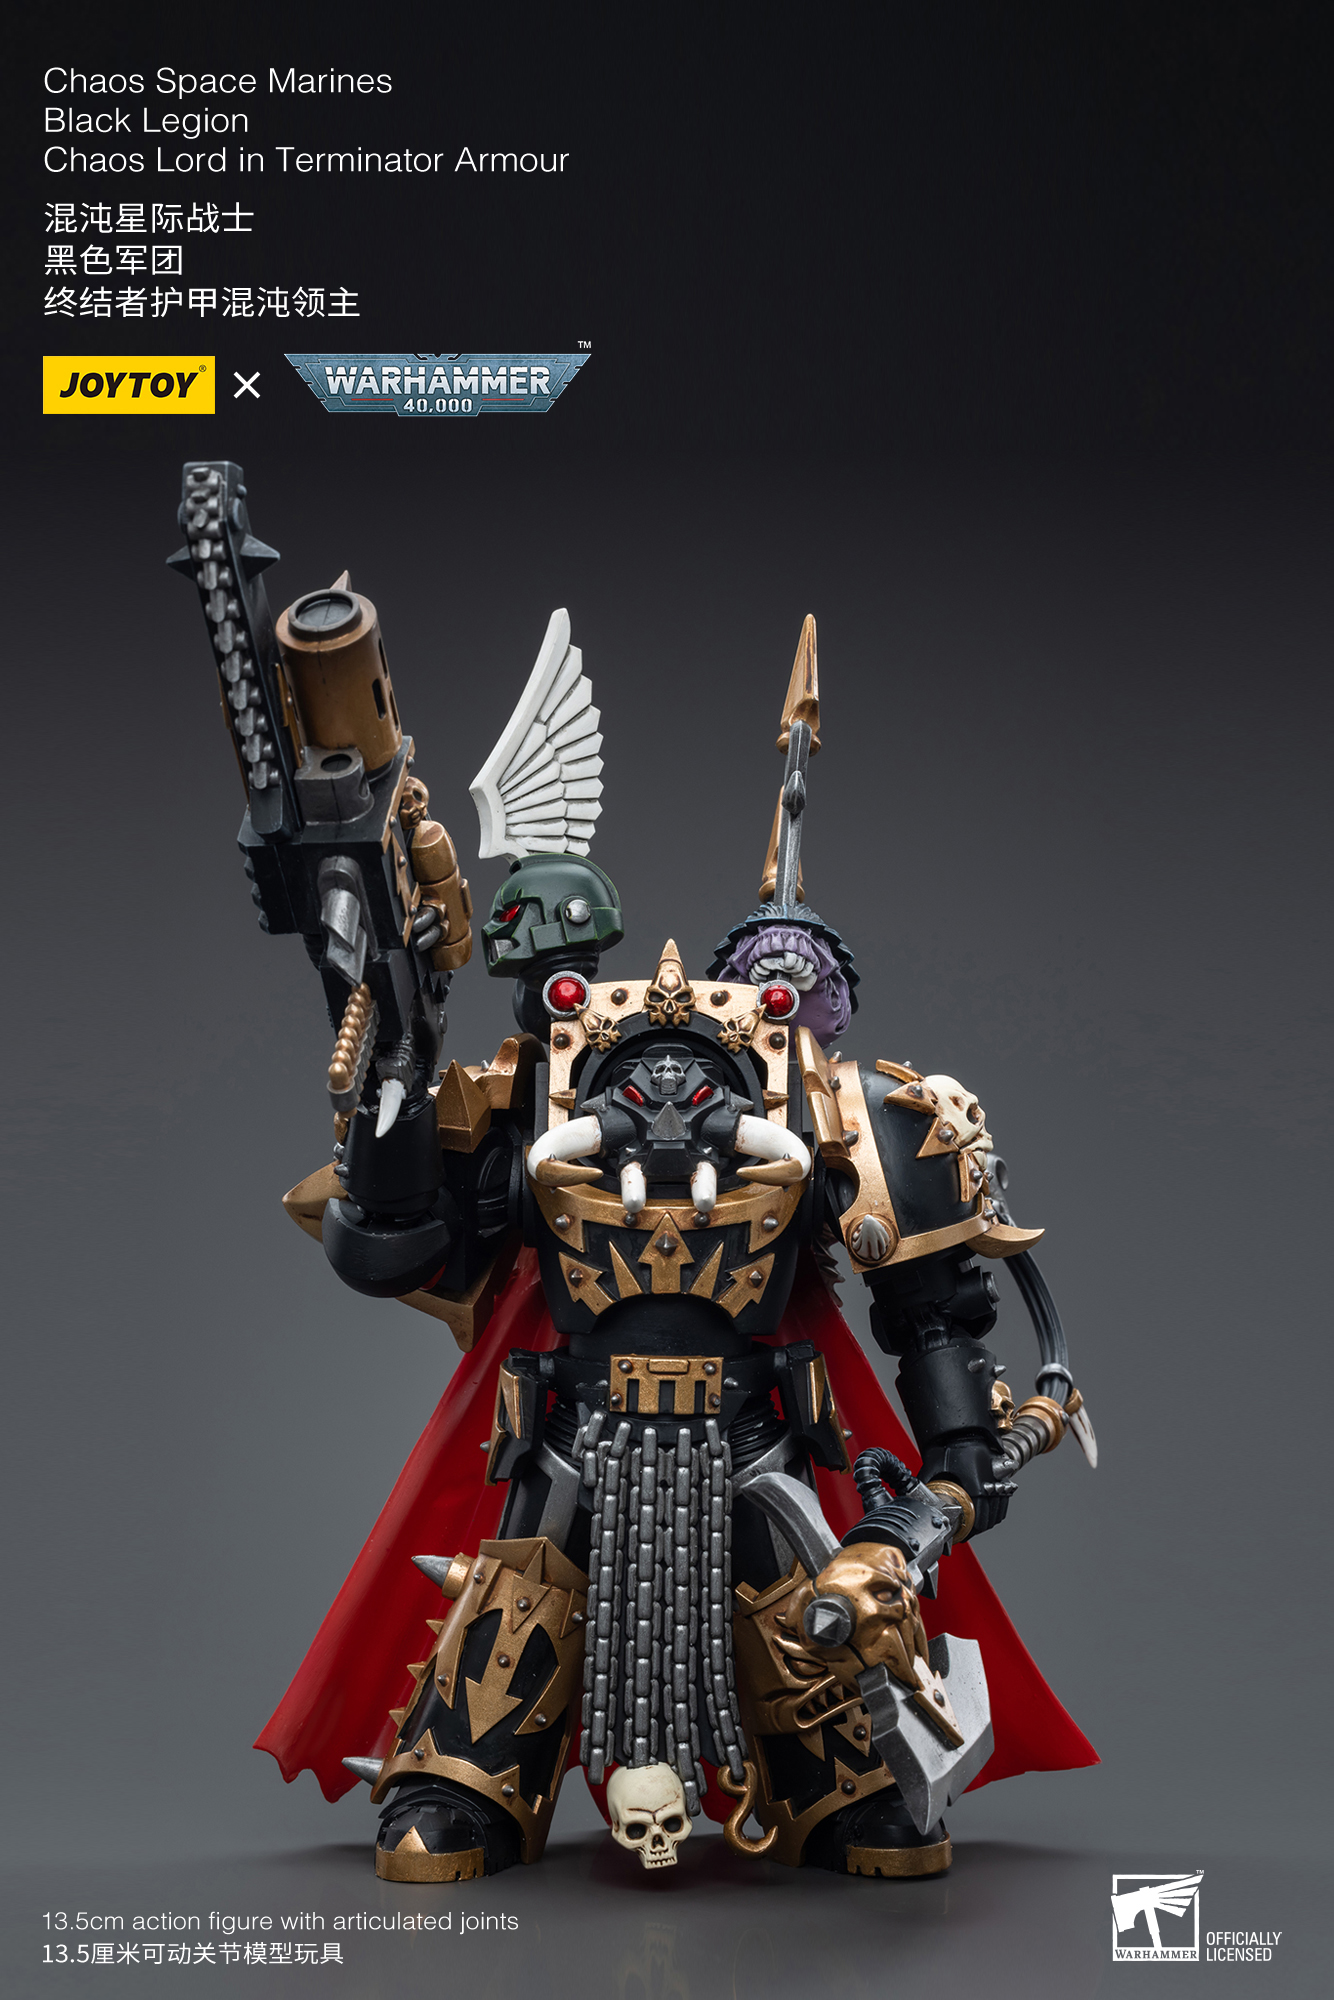 [Pre-Order] [JoyToy] Action Figure Warhammer 40K Chaos Space Marines Black Legion Chaos Lord in Terminator Armour JT6489